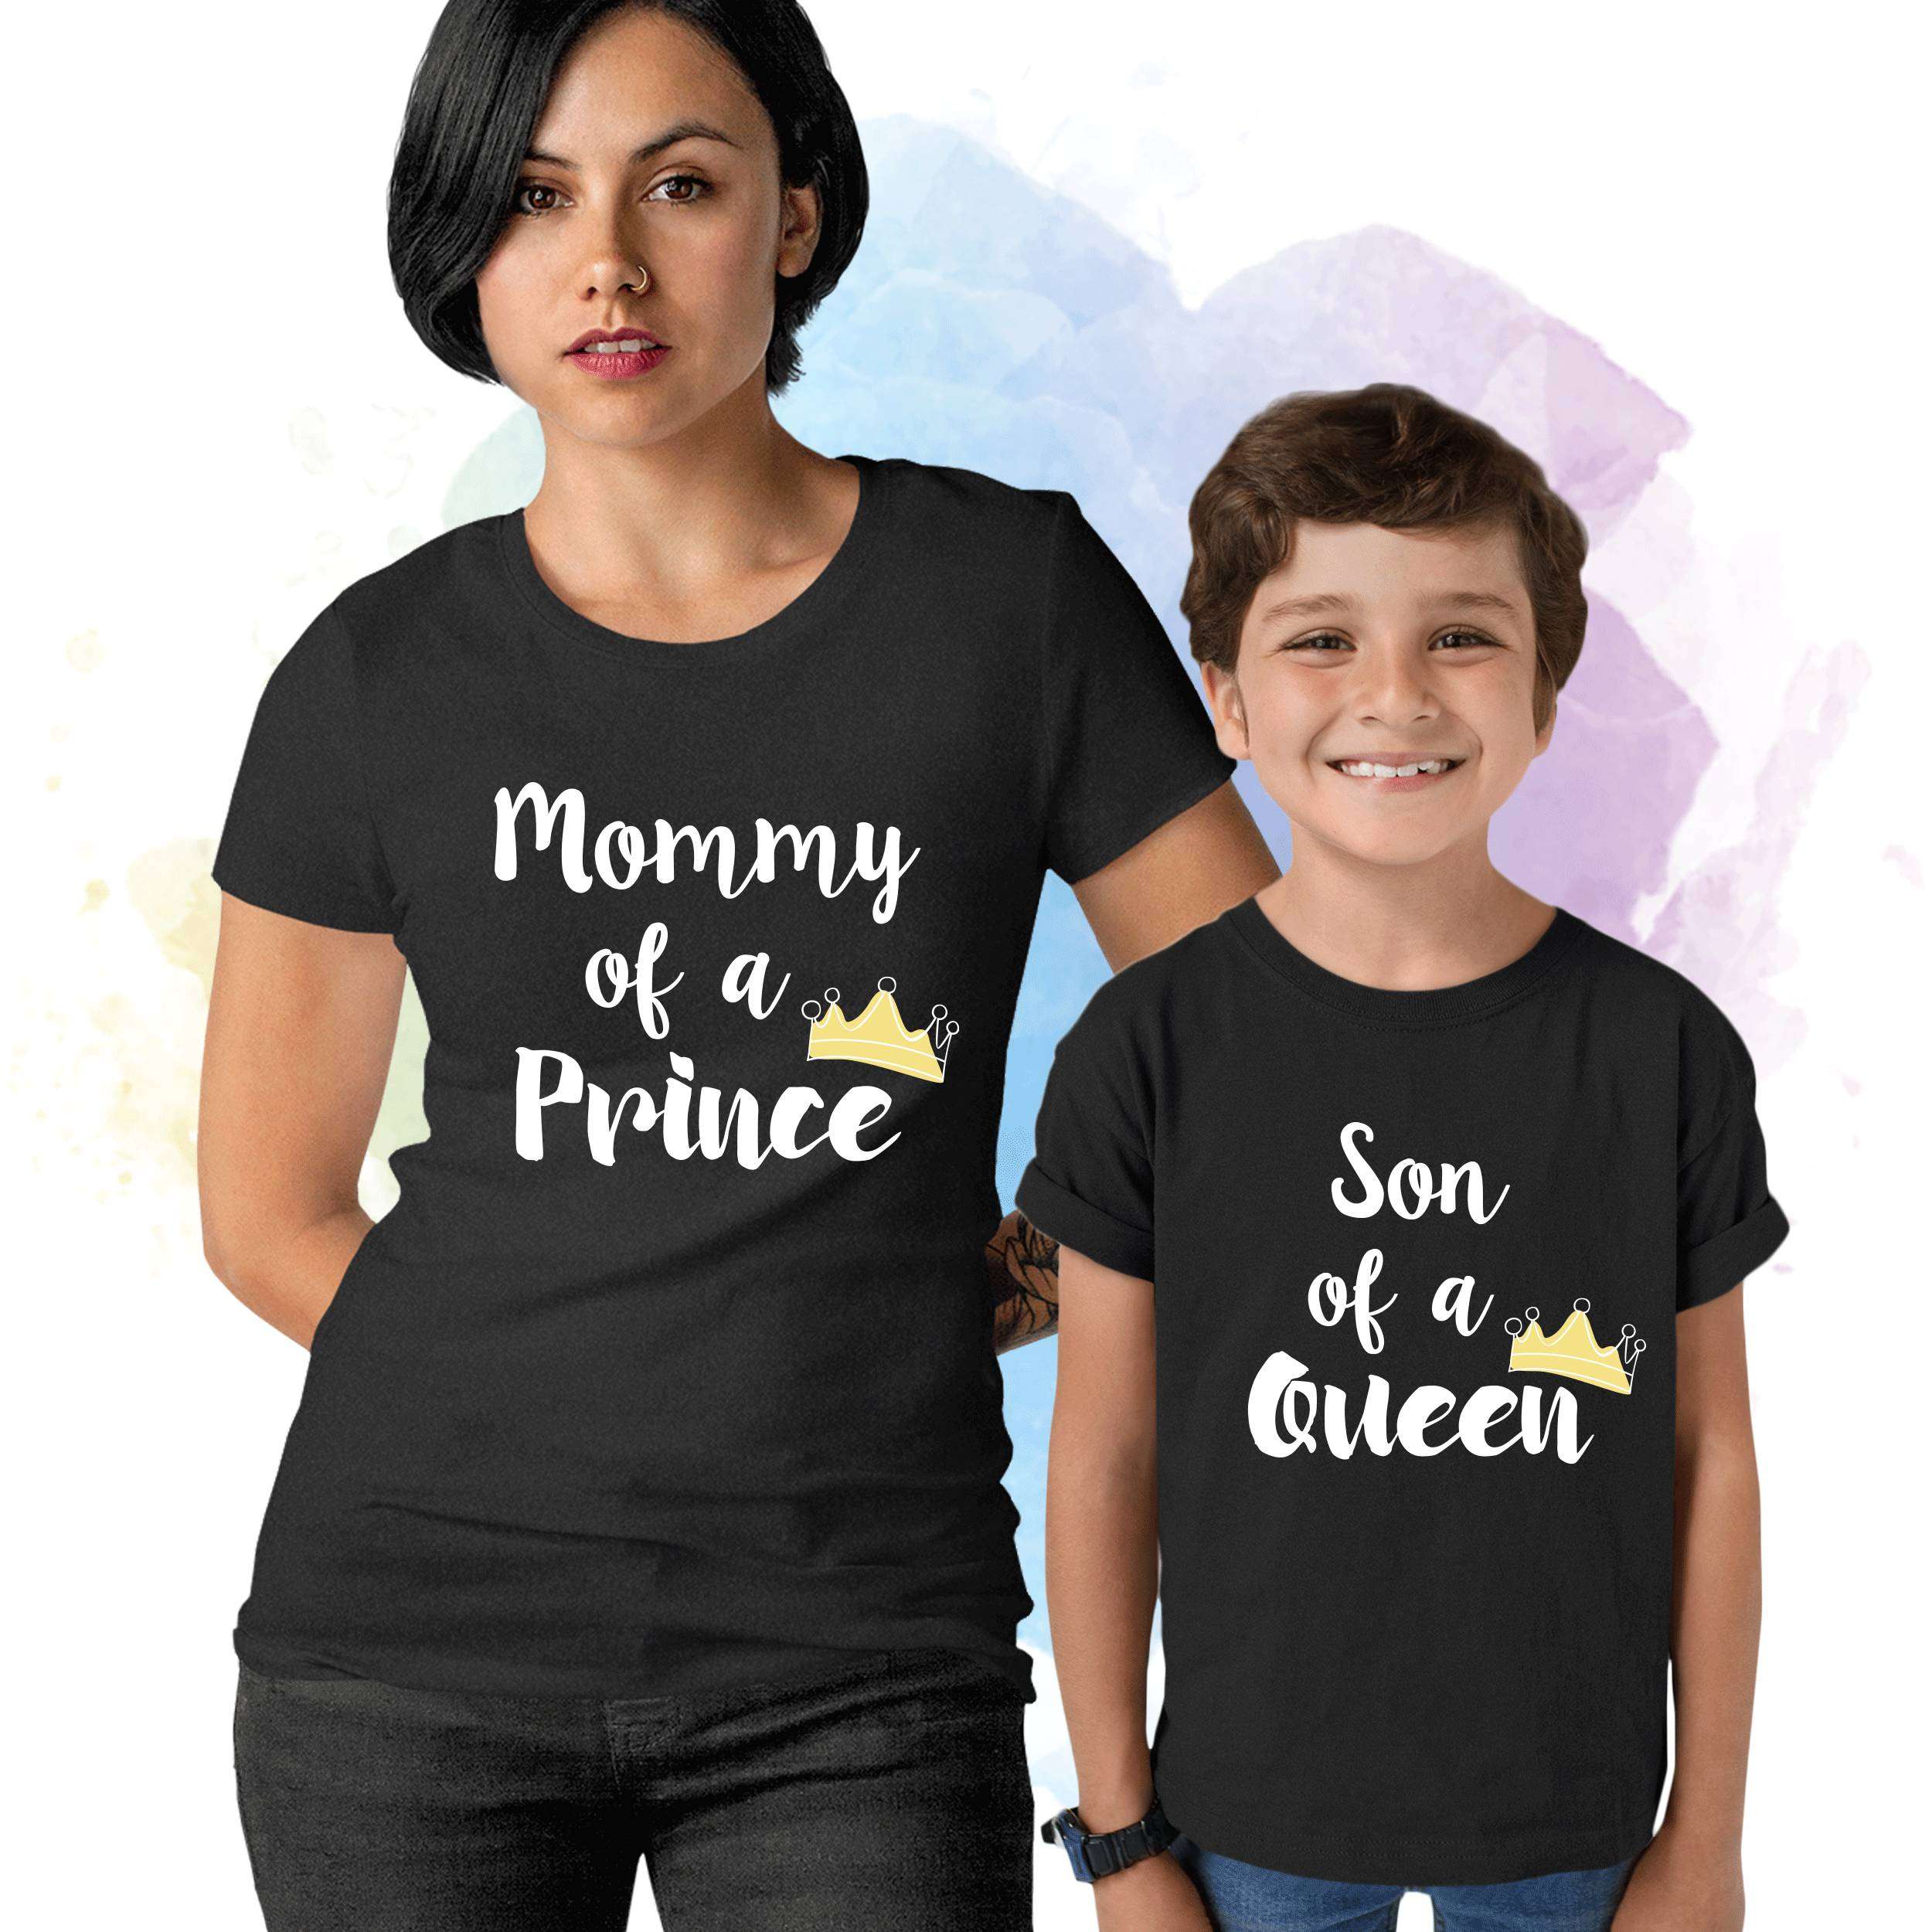 Mother and son shirts